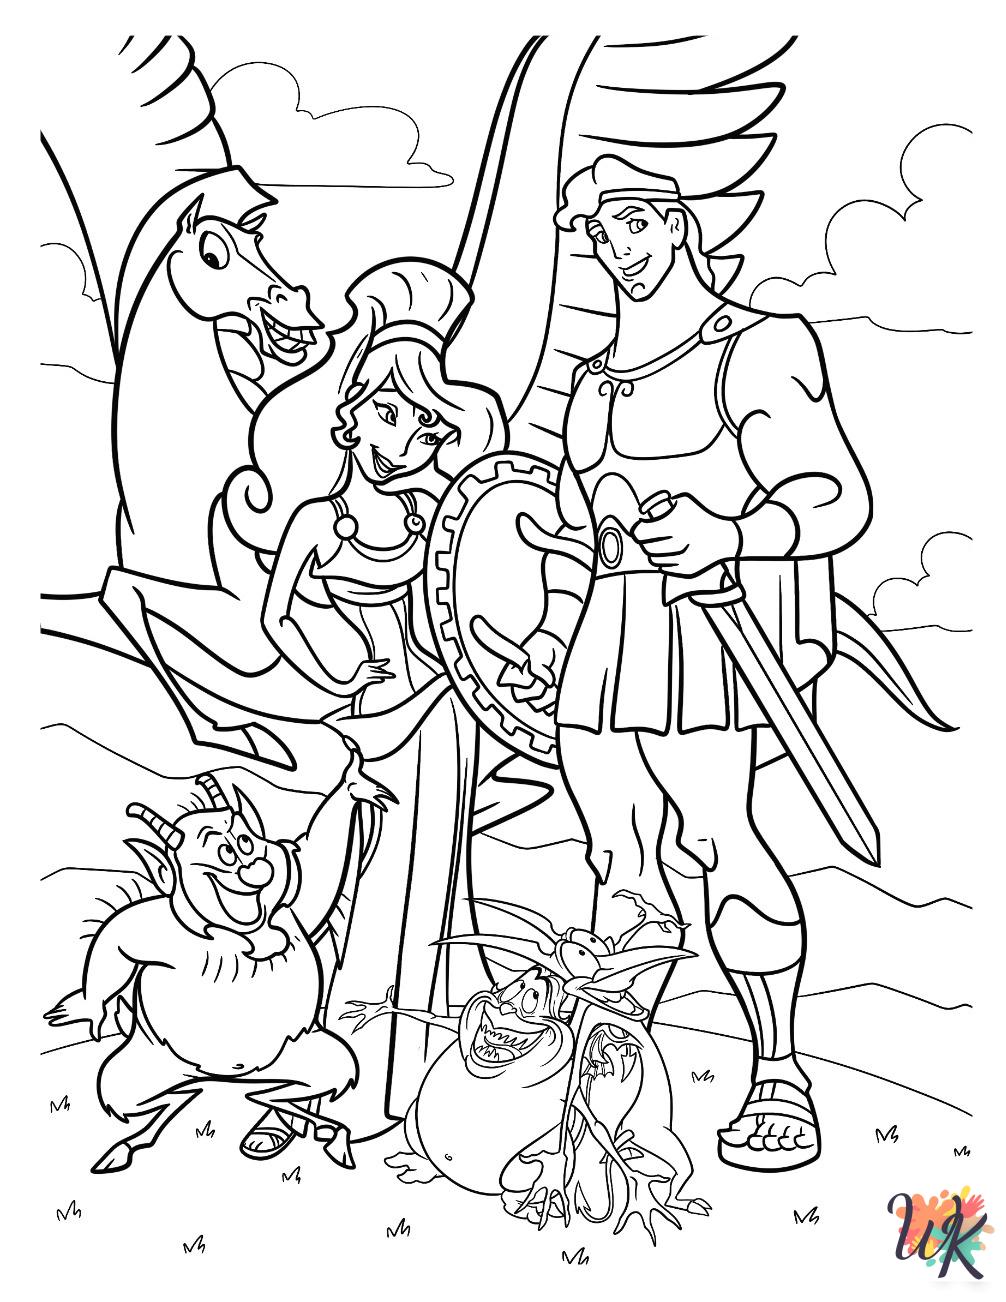 Hercules free coloring pages